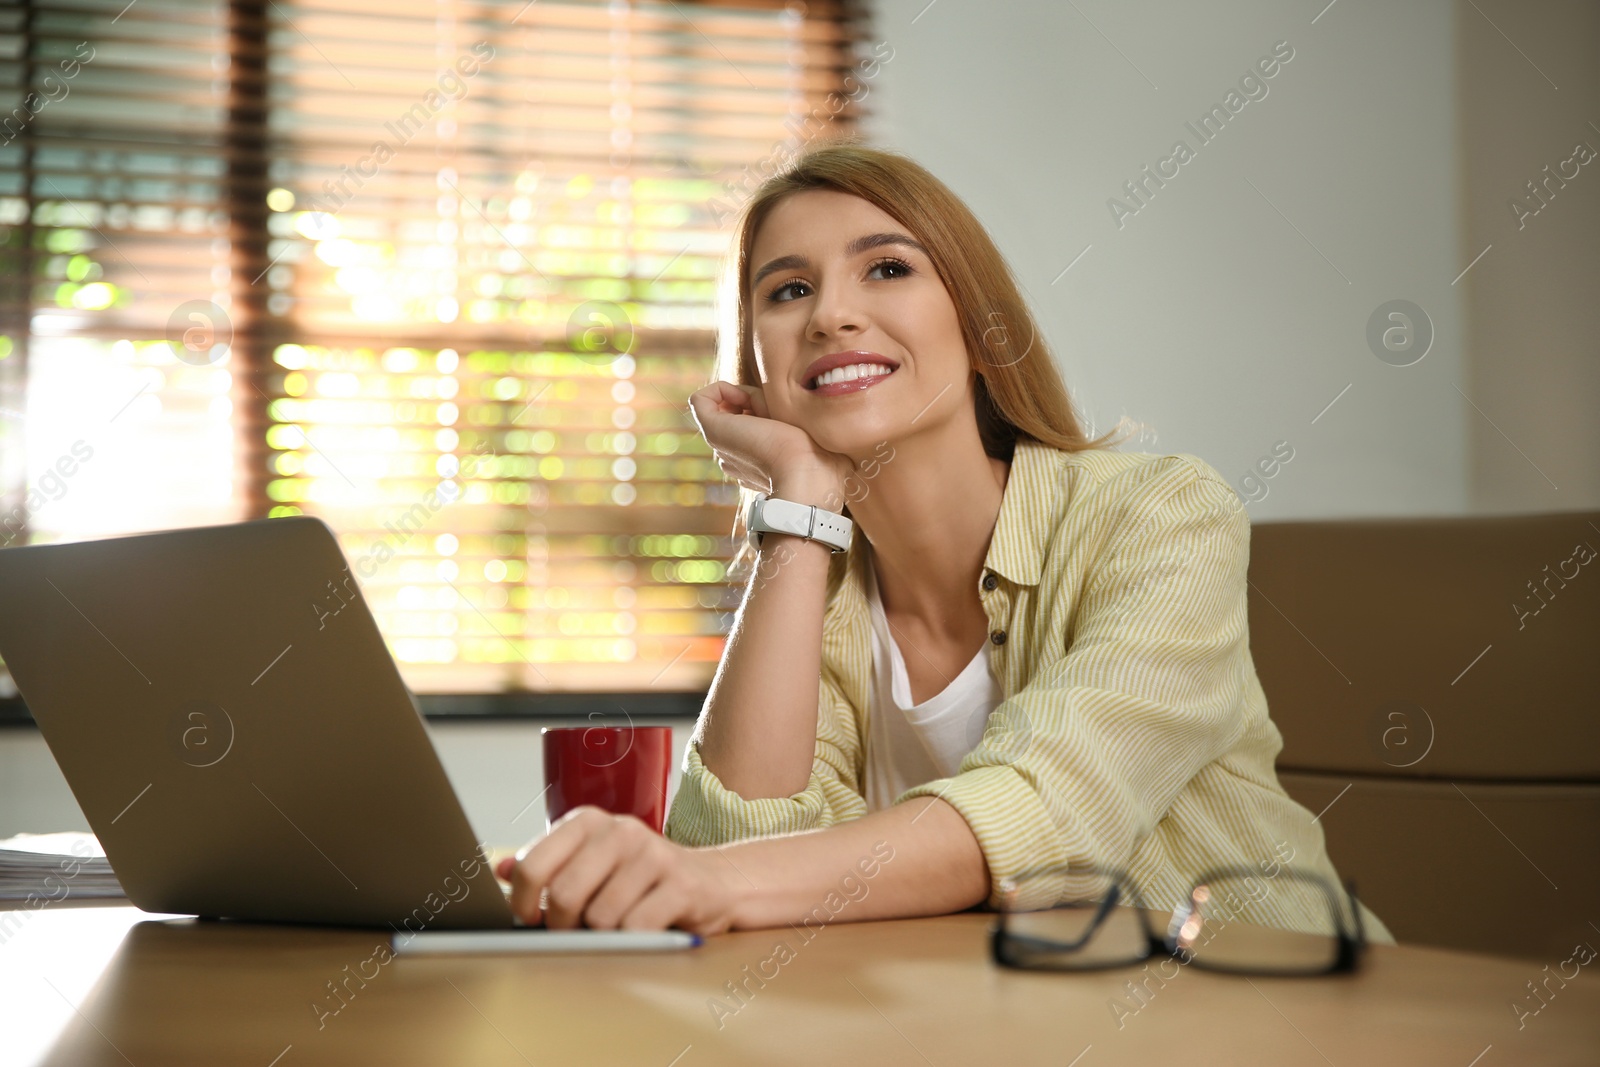 Photo of Young woman relaxing at desk in office